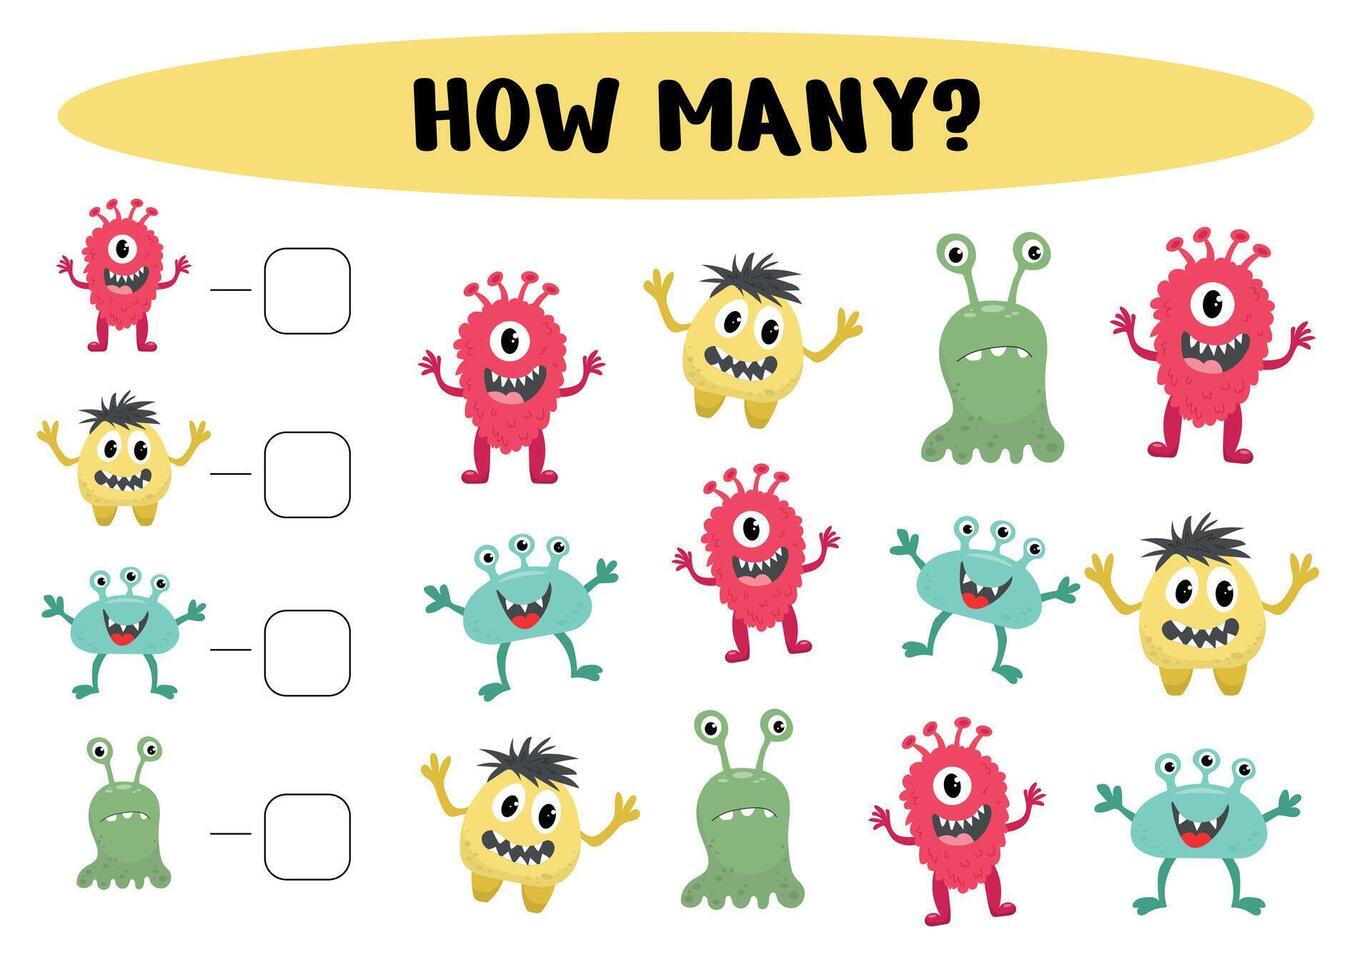 How many monsters. Mathematical game for preschoolers. Counting game for preschool children. Educational math game. Vector illustrationon